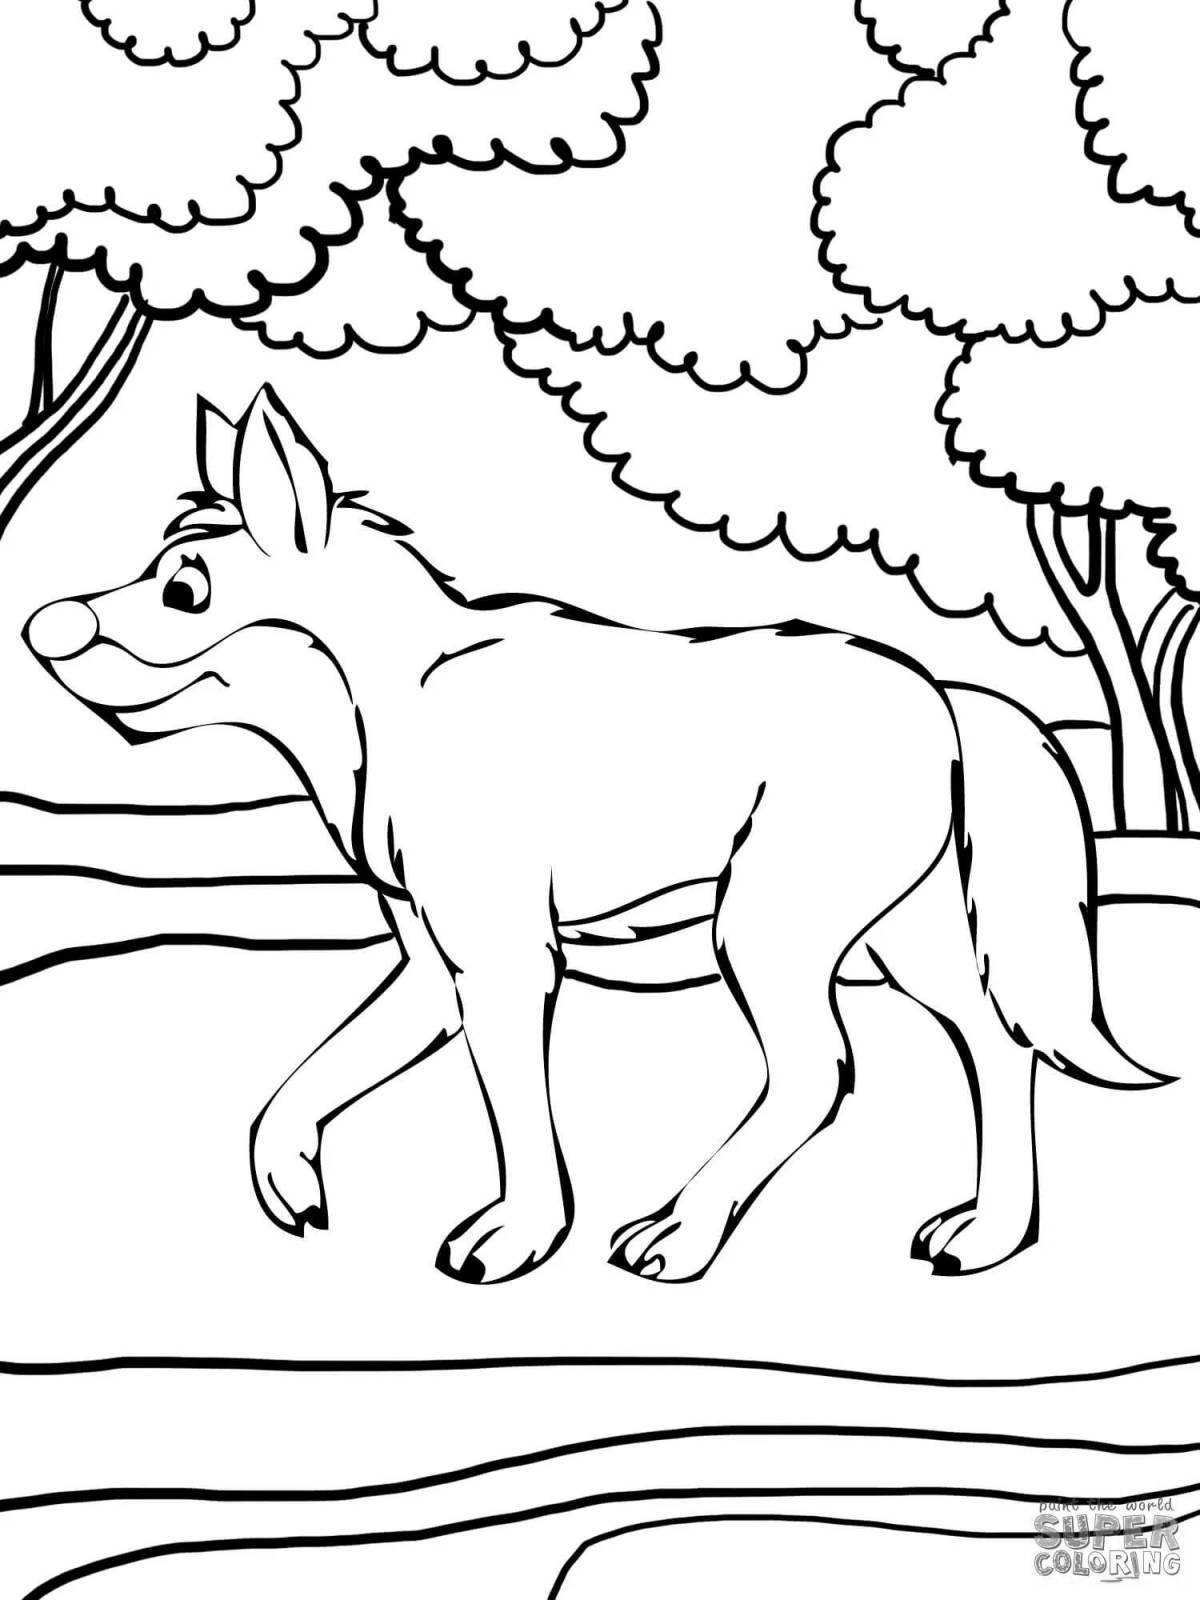 Snowy winter wolf coloring page